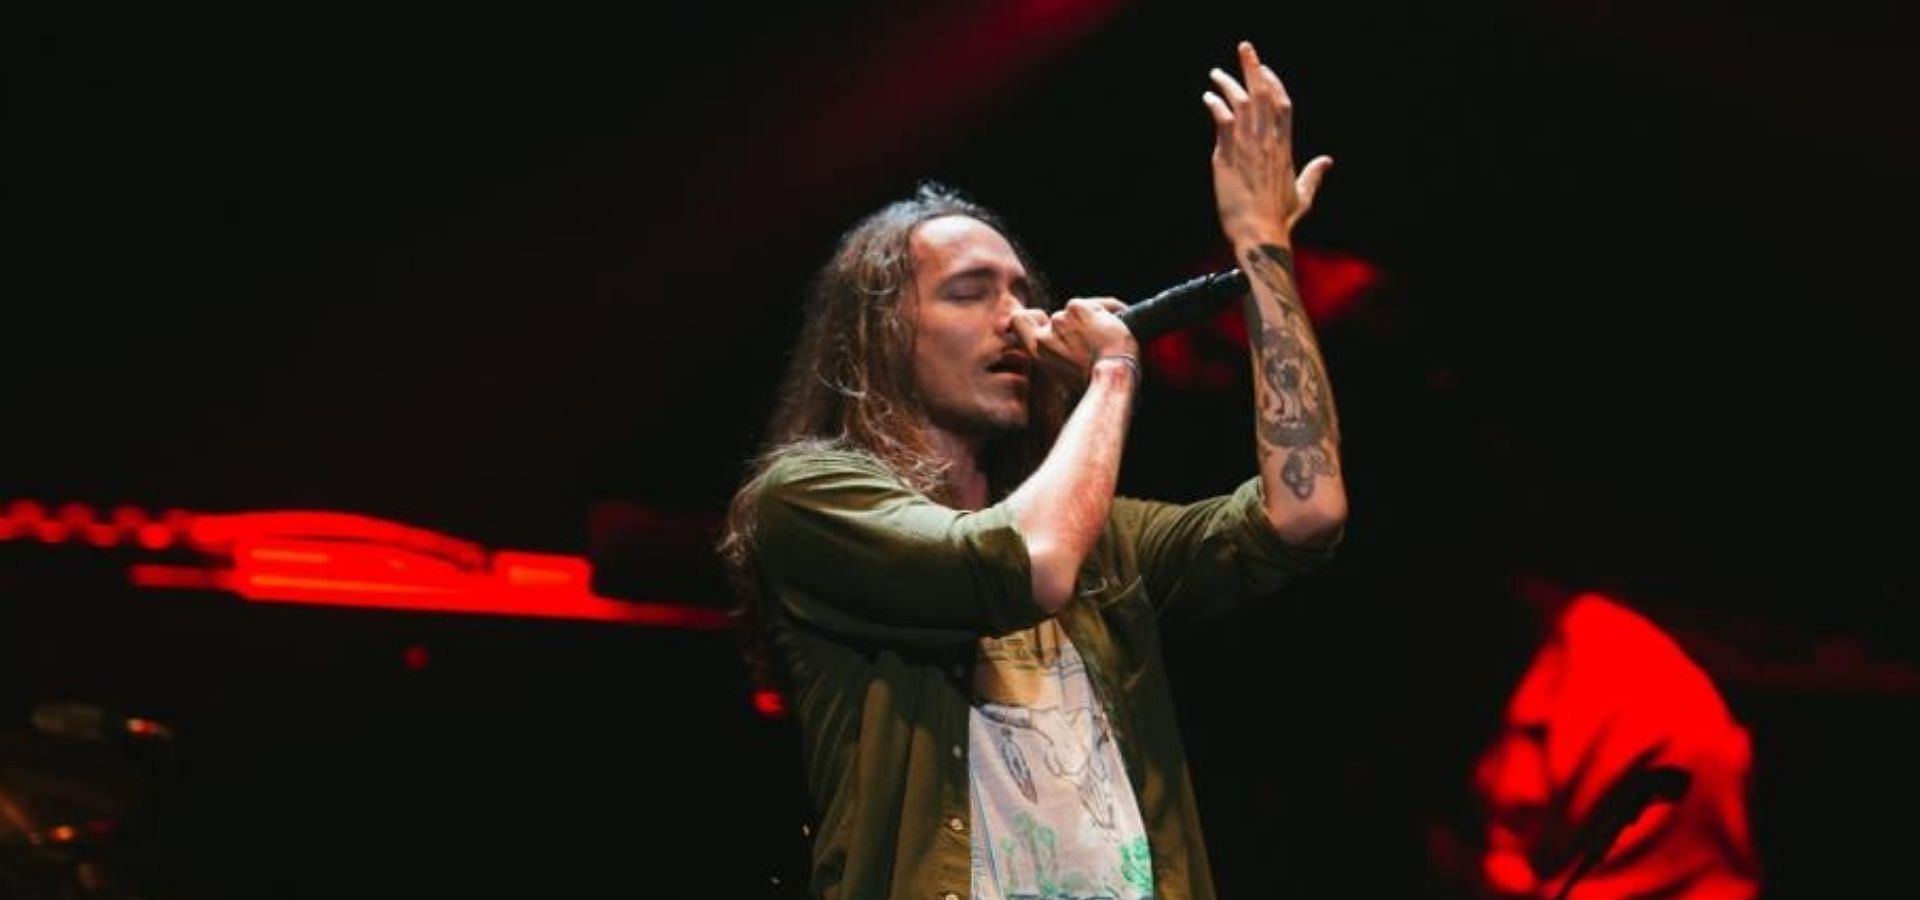 Incubus Tour 2023 Tickets, presale, dates, venues and more